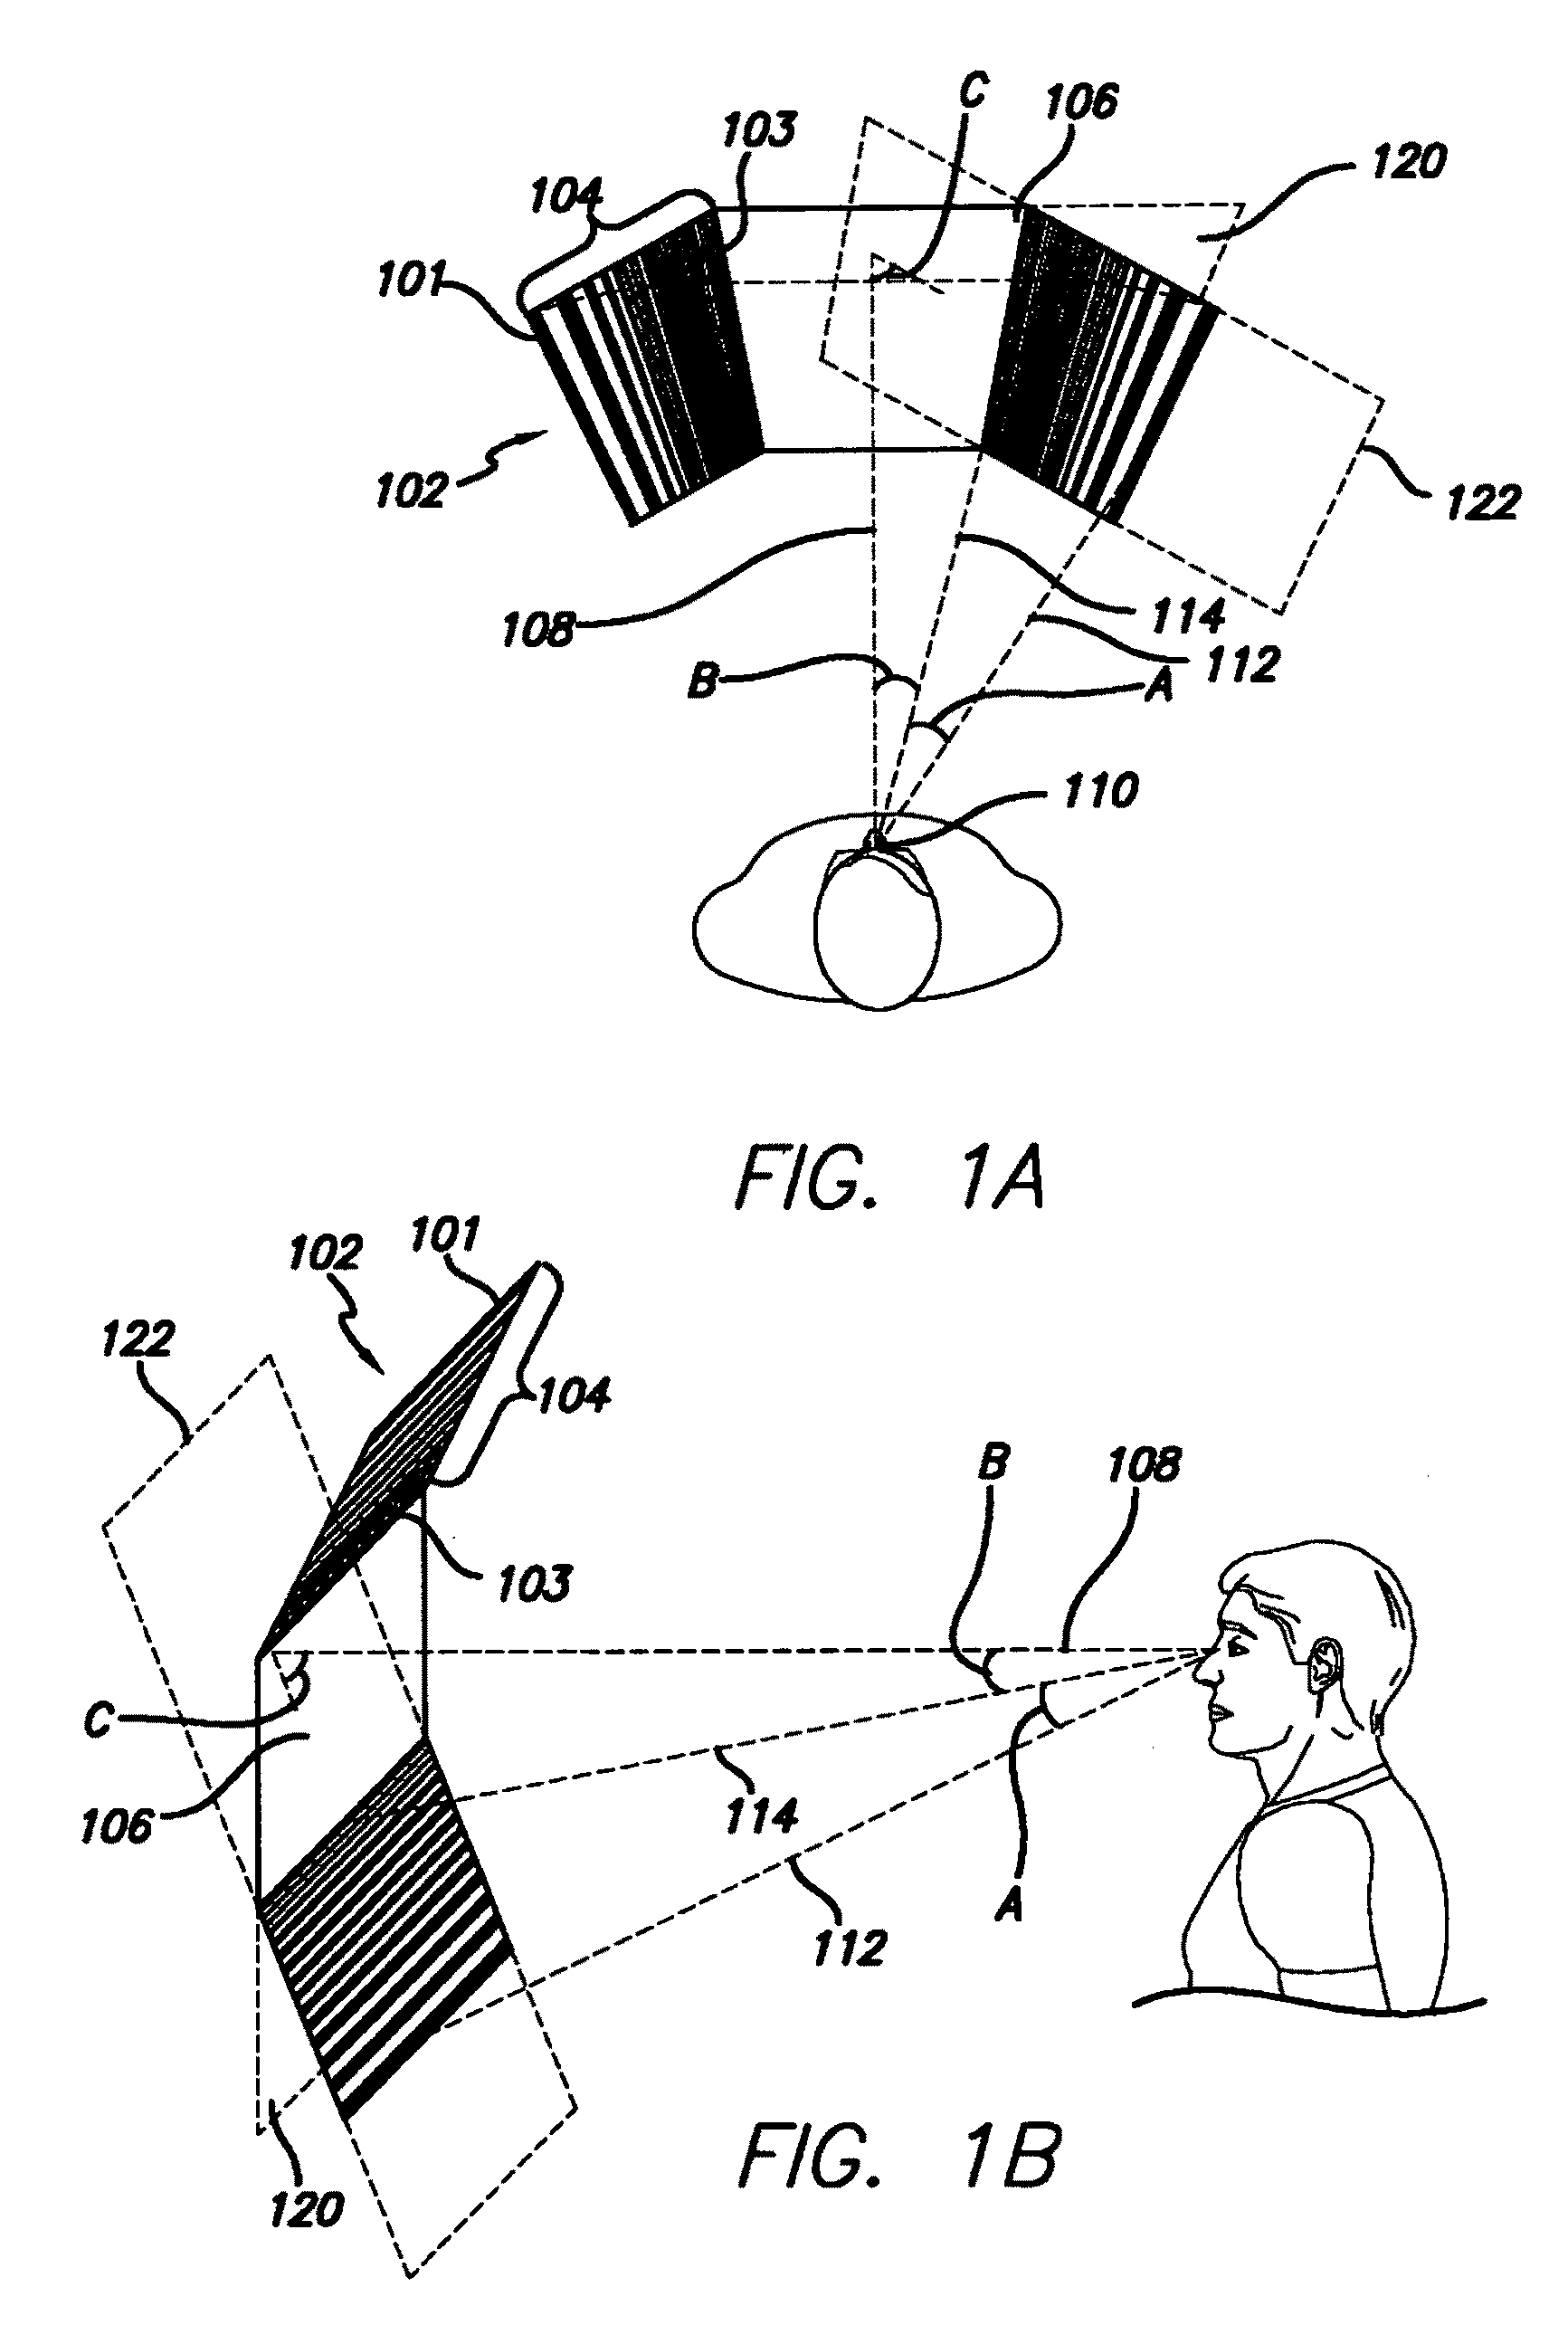 Method and apparatus for preventing, controlling and/or treating eye fatigue and myopia